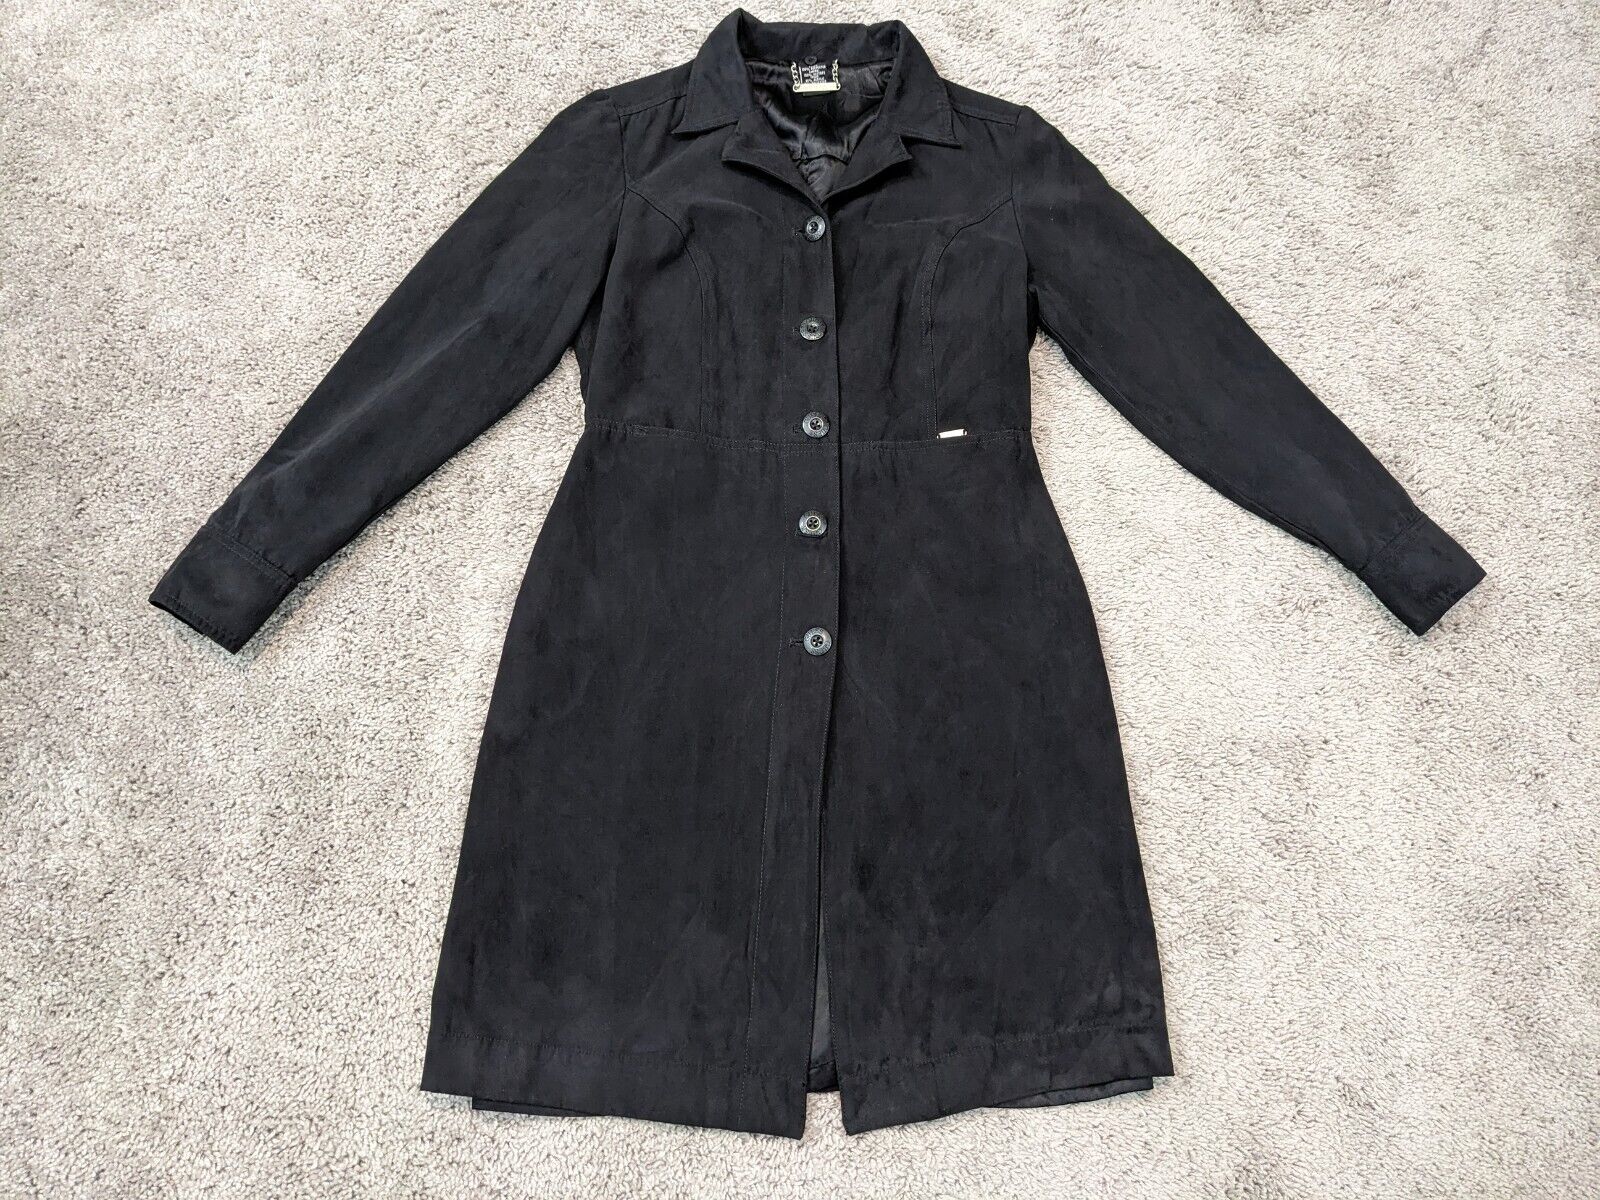 Vintage Guess USA Trench Coat Women\'s Size Medium Black Made in Macau